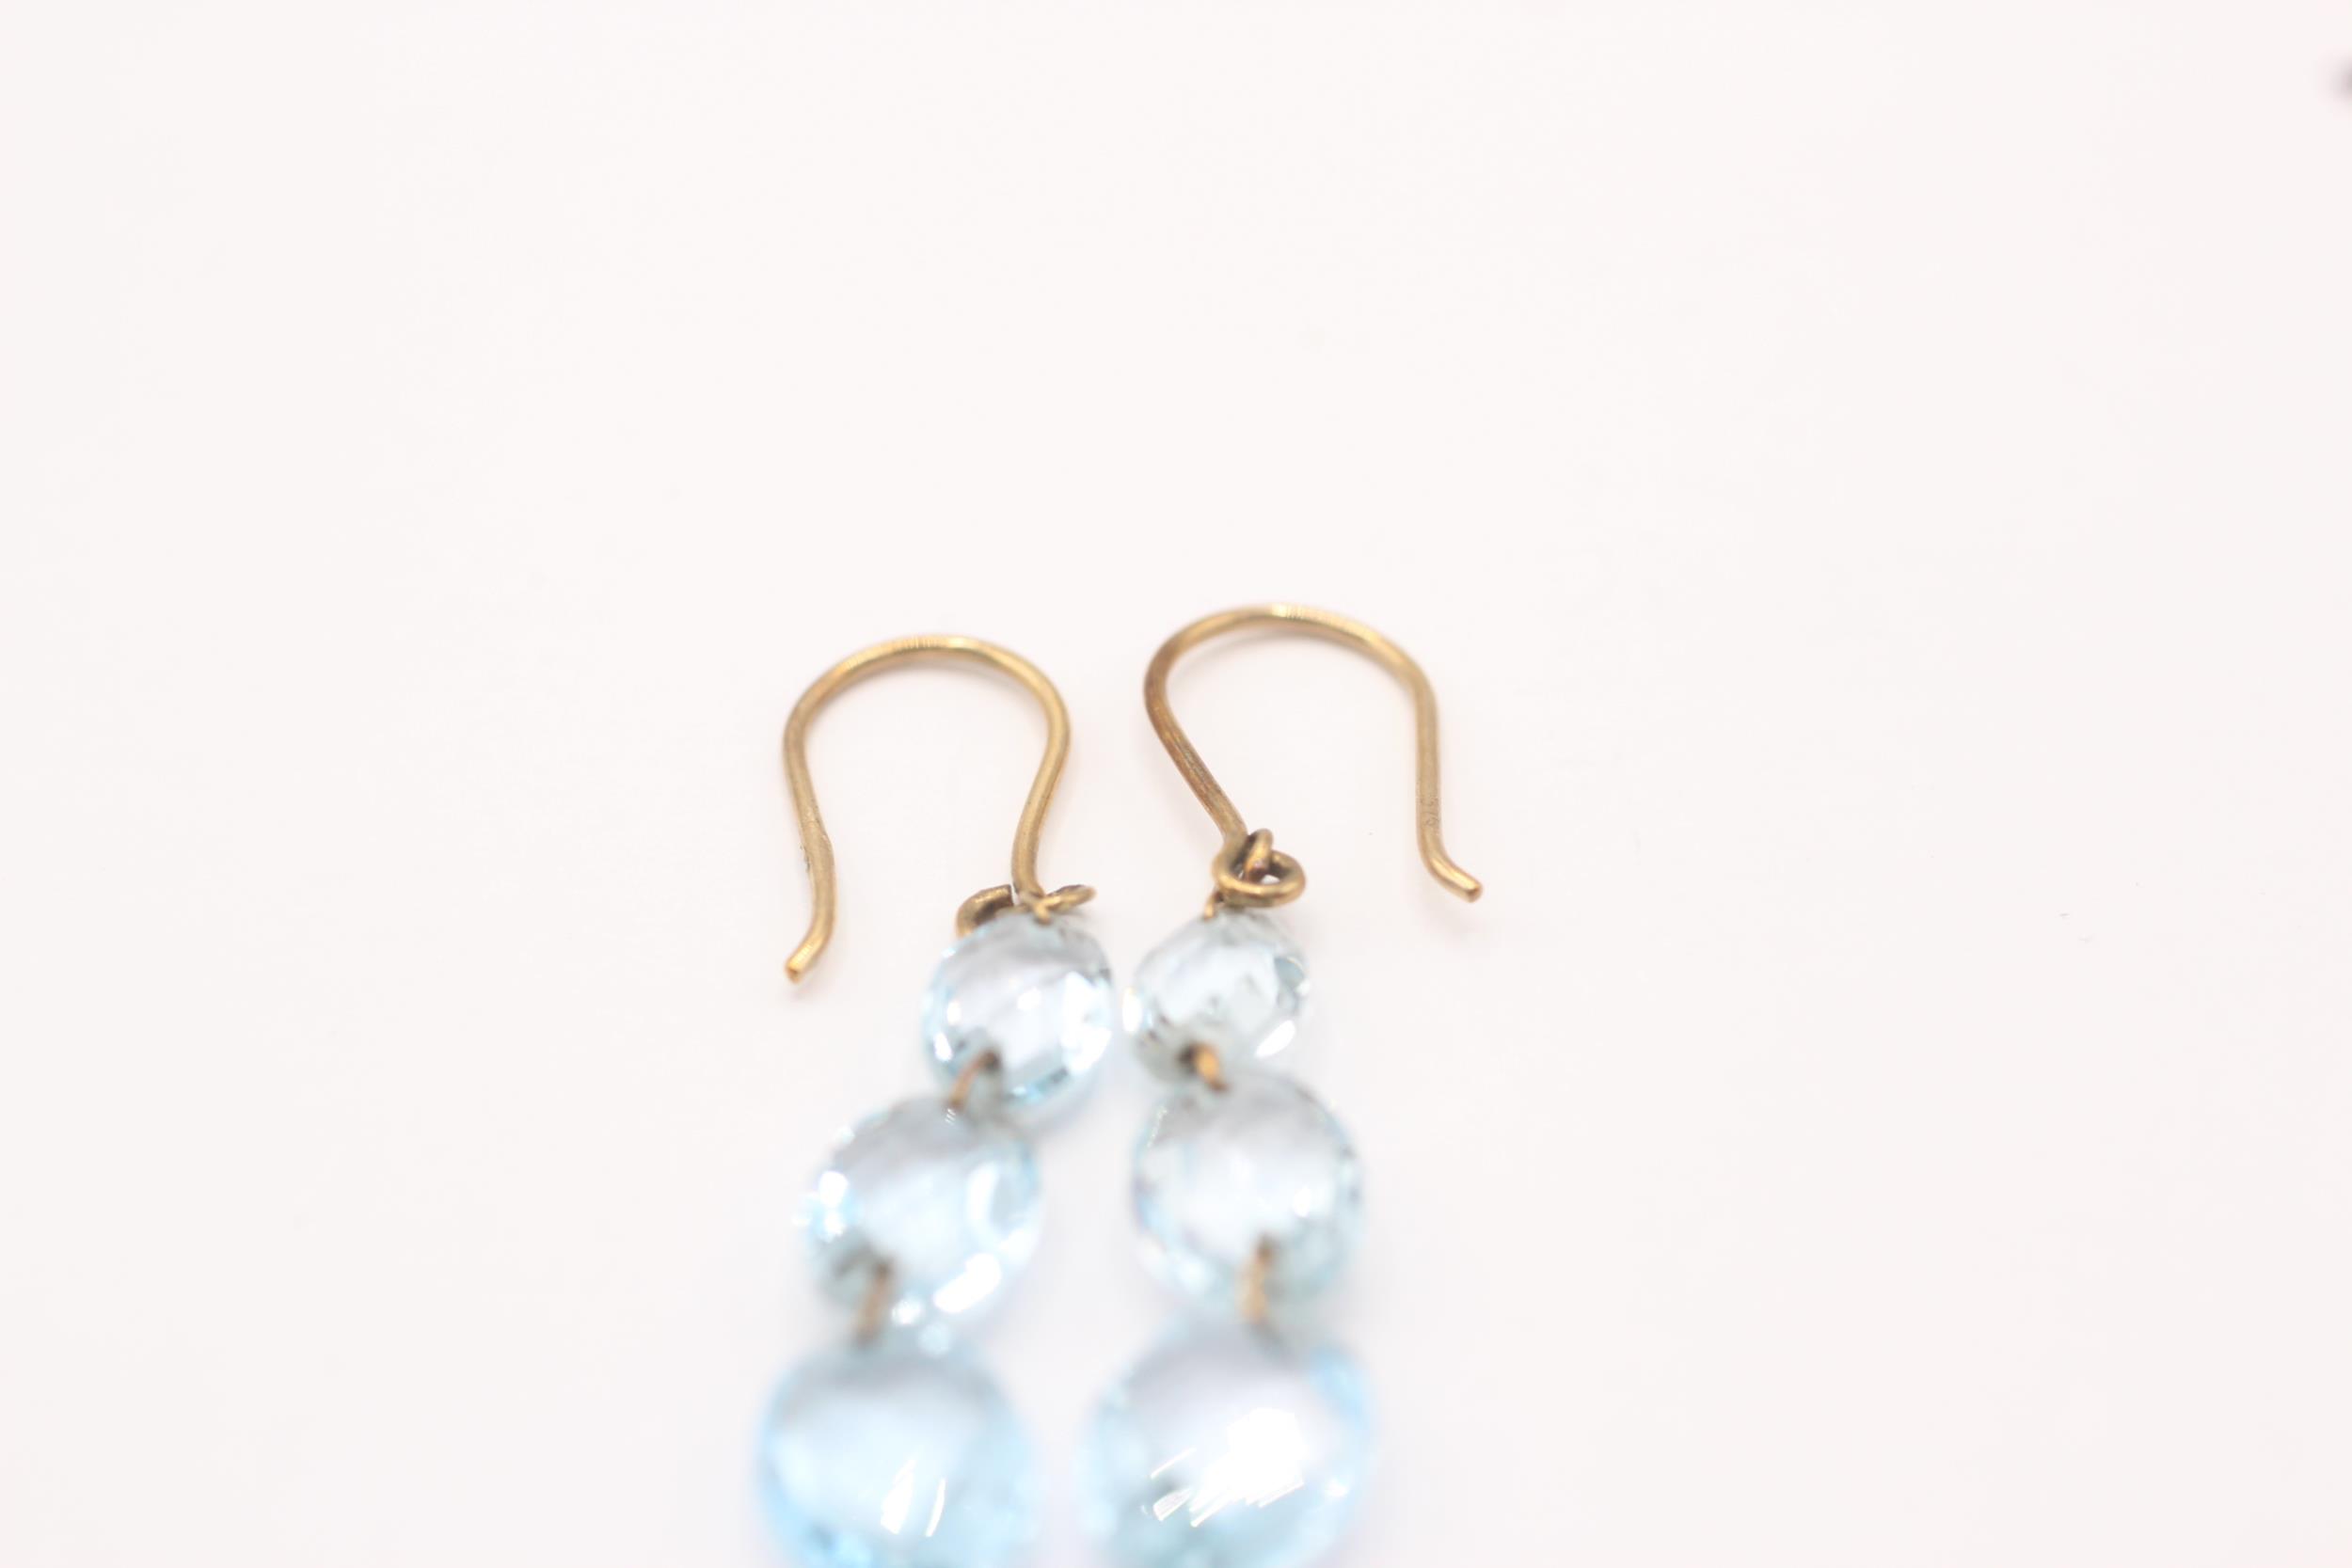 9ct gold faceted blue topaz drop earrings with French hooks 2.1 g - Image 2 of 5